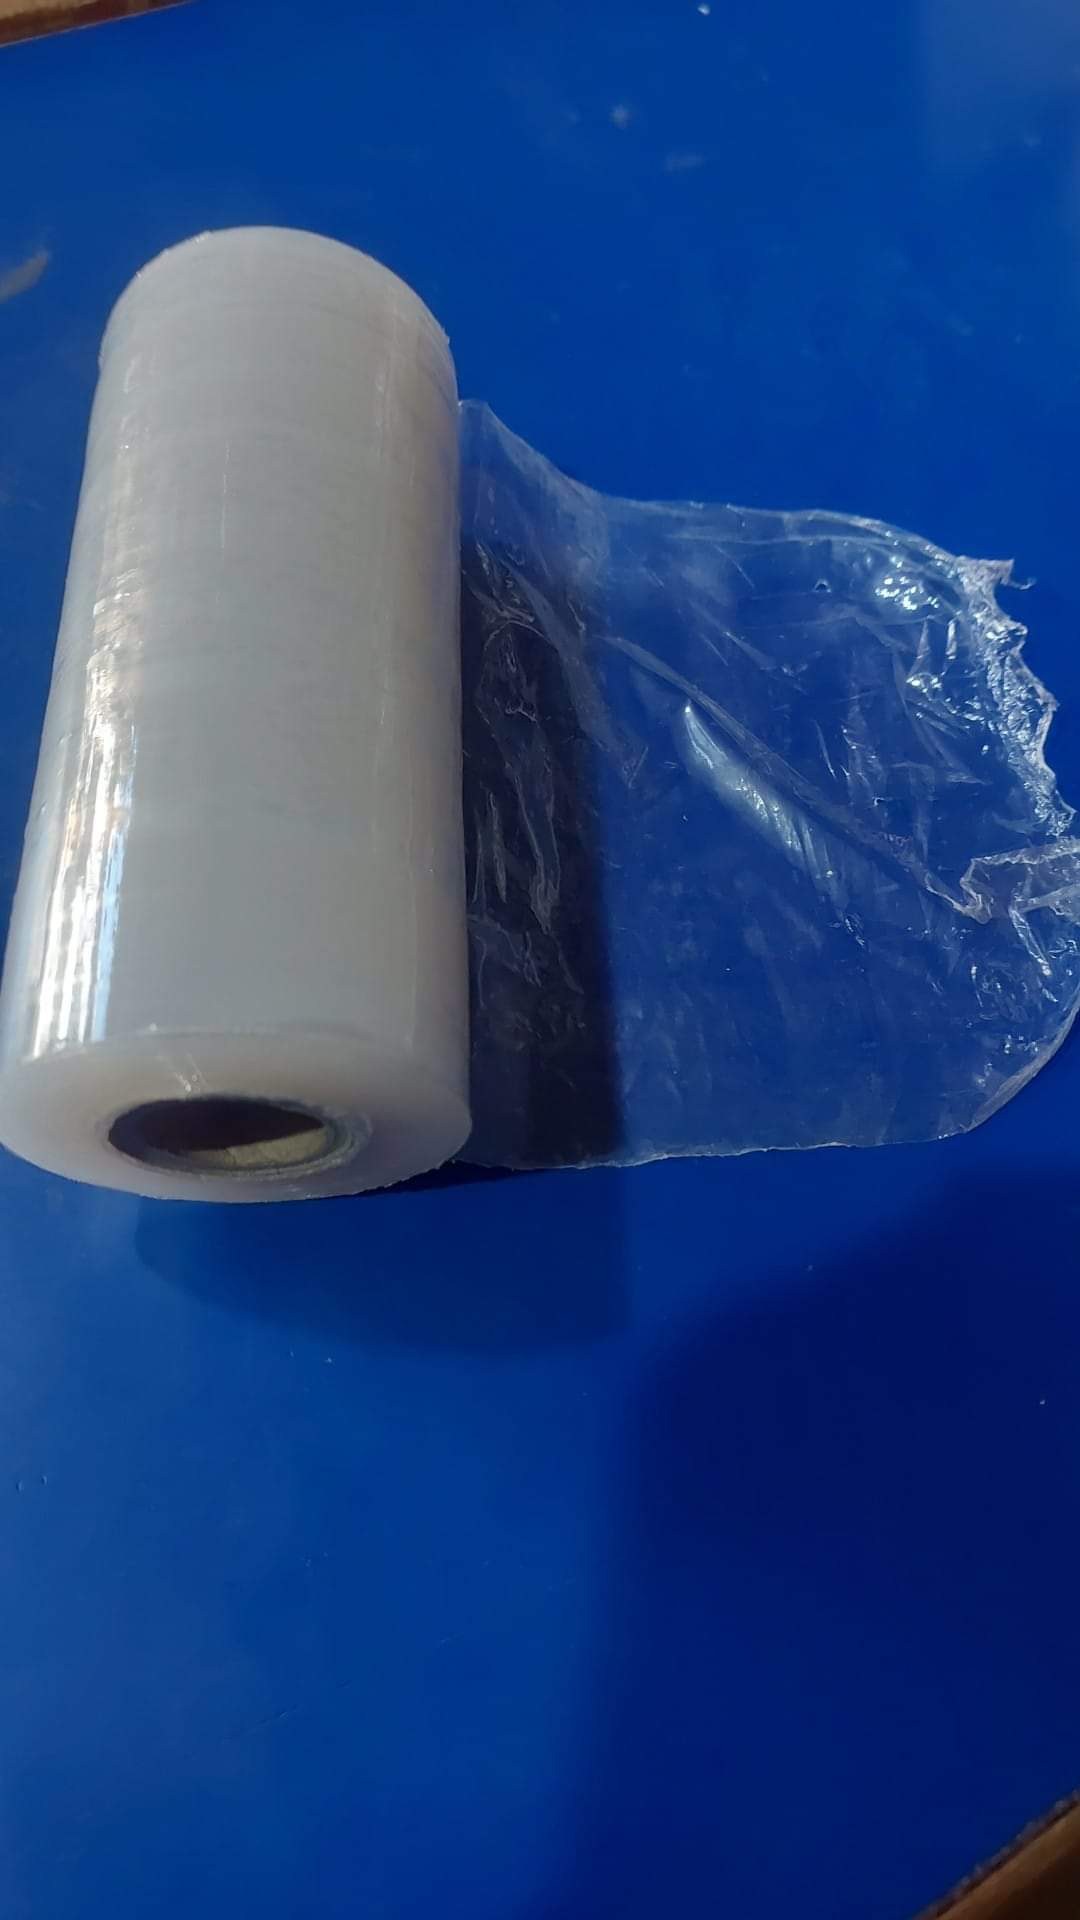 Packing shrink wrap